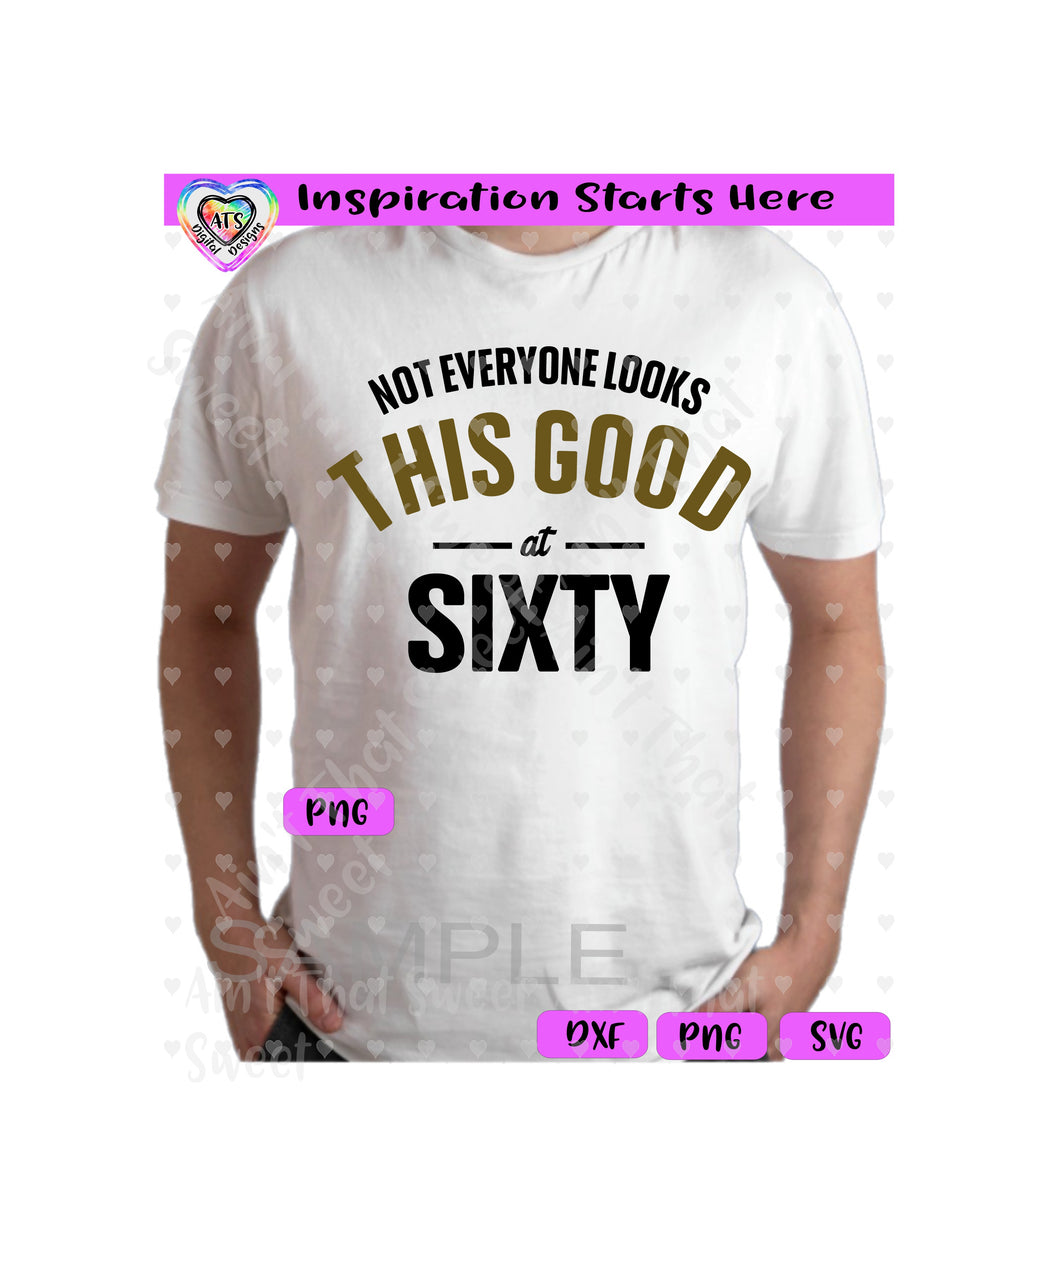 Not Everyone Looks This Good At Sixty - Transparent PNG SVG DXF - Silhouette, Cricut, ScanNCut